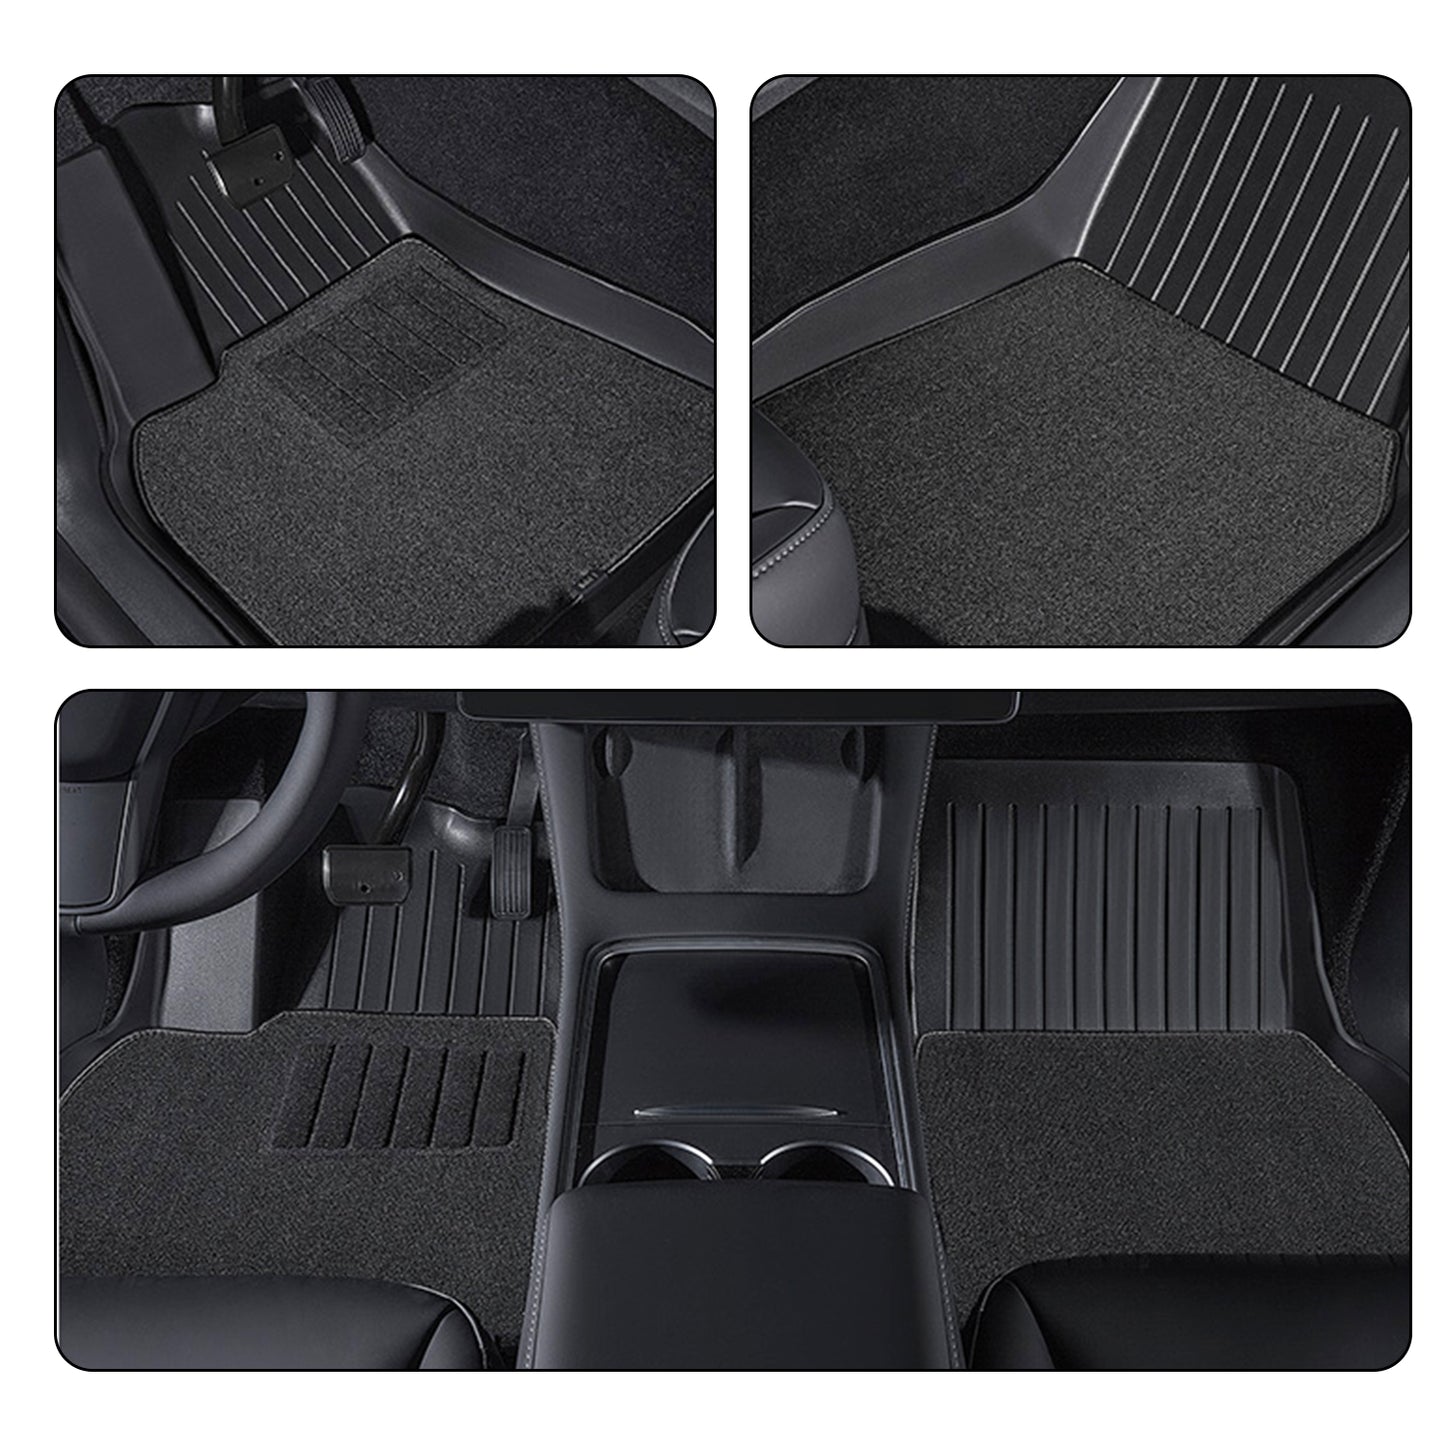 tesla model Y foot floor mat mats TPE waterproof non slip all weather car 2022 2023 2021 2020 s3xy arcoche accessories accessory aftermarket price Vehicles standard long range performance sr+ electric car rwd ev interior exterior diy decoration price elon musk must have black white red blue 5 7 seats seat